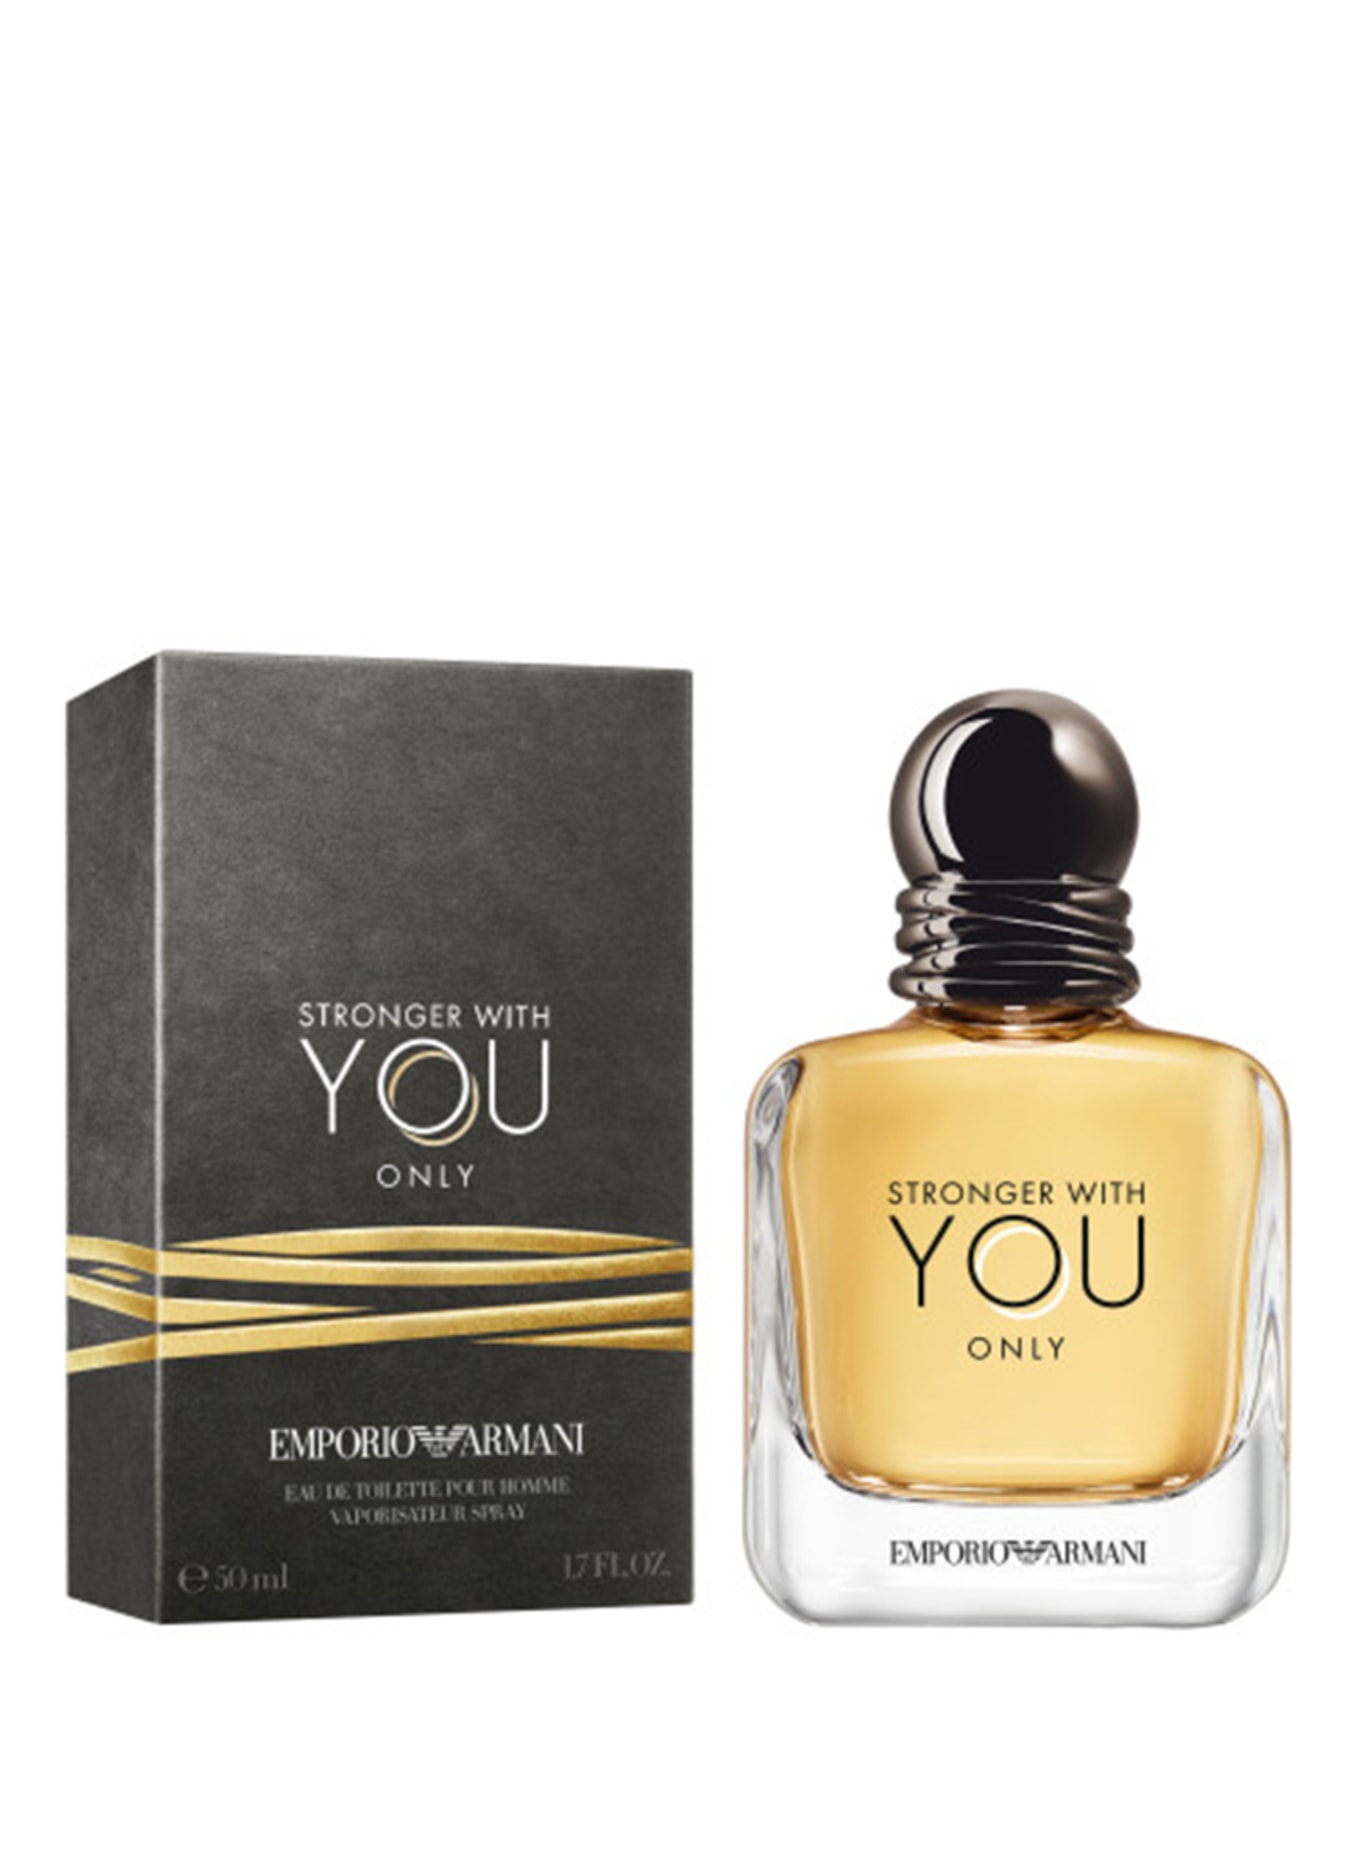 EMPORIO ARMANI STRONGER WITH YOU ONLY (Obrazek 2)